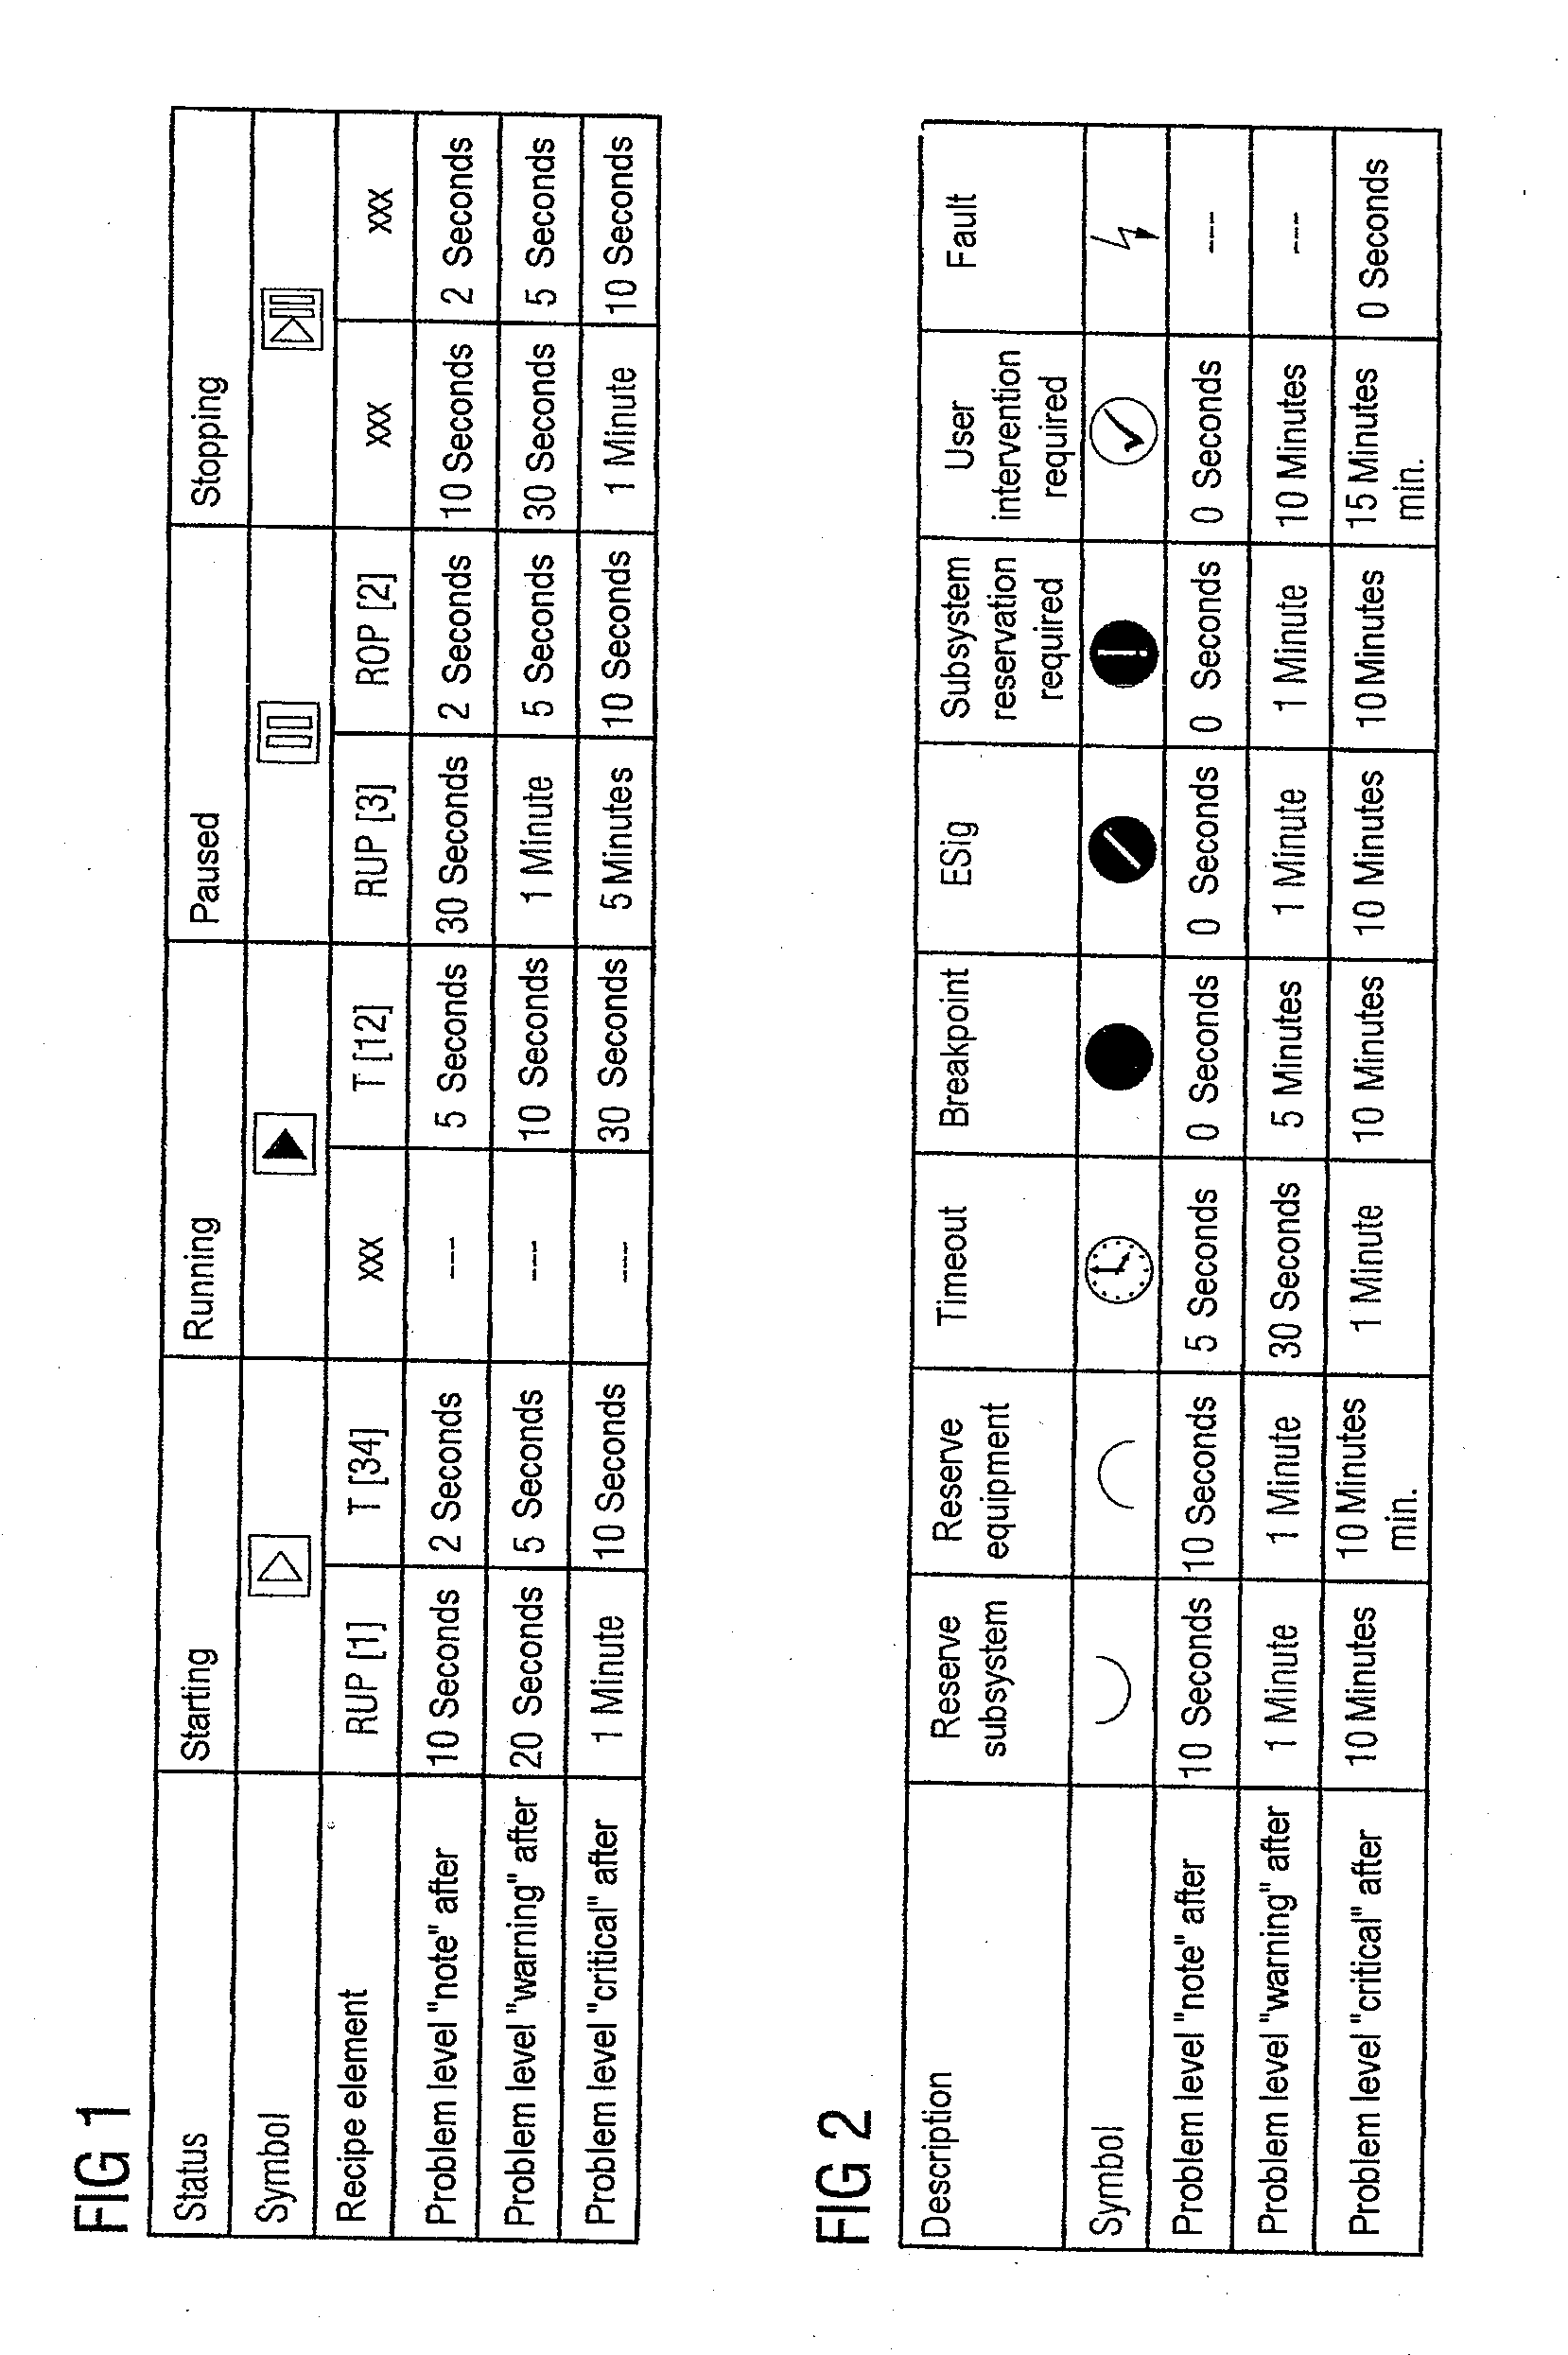 Method for Monitoring Sequencing of a Control Recipe for a Batch Process